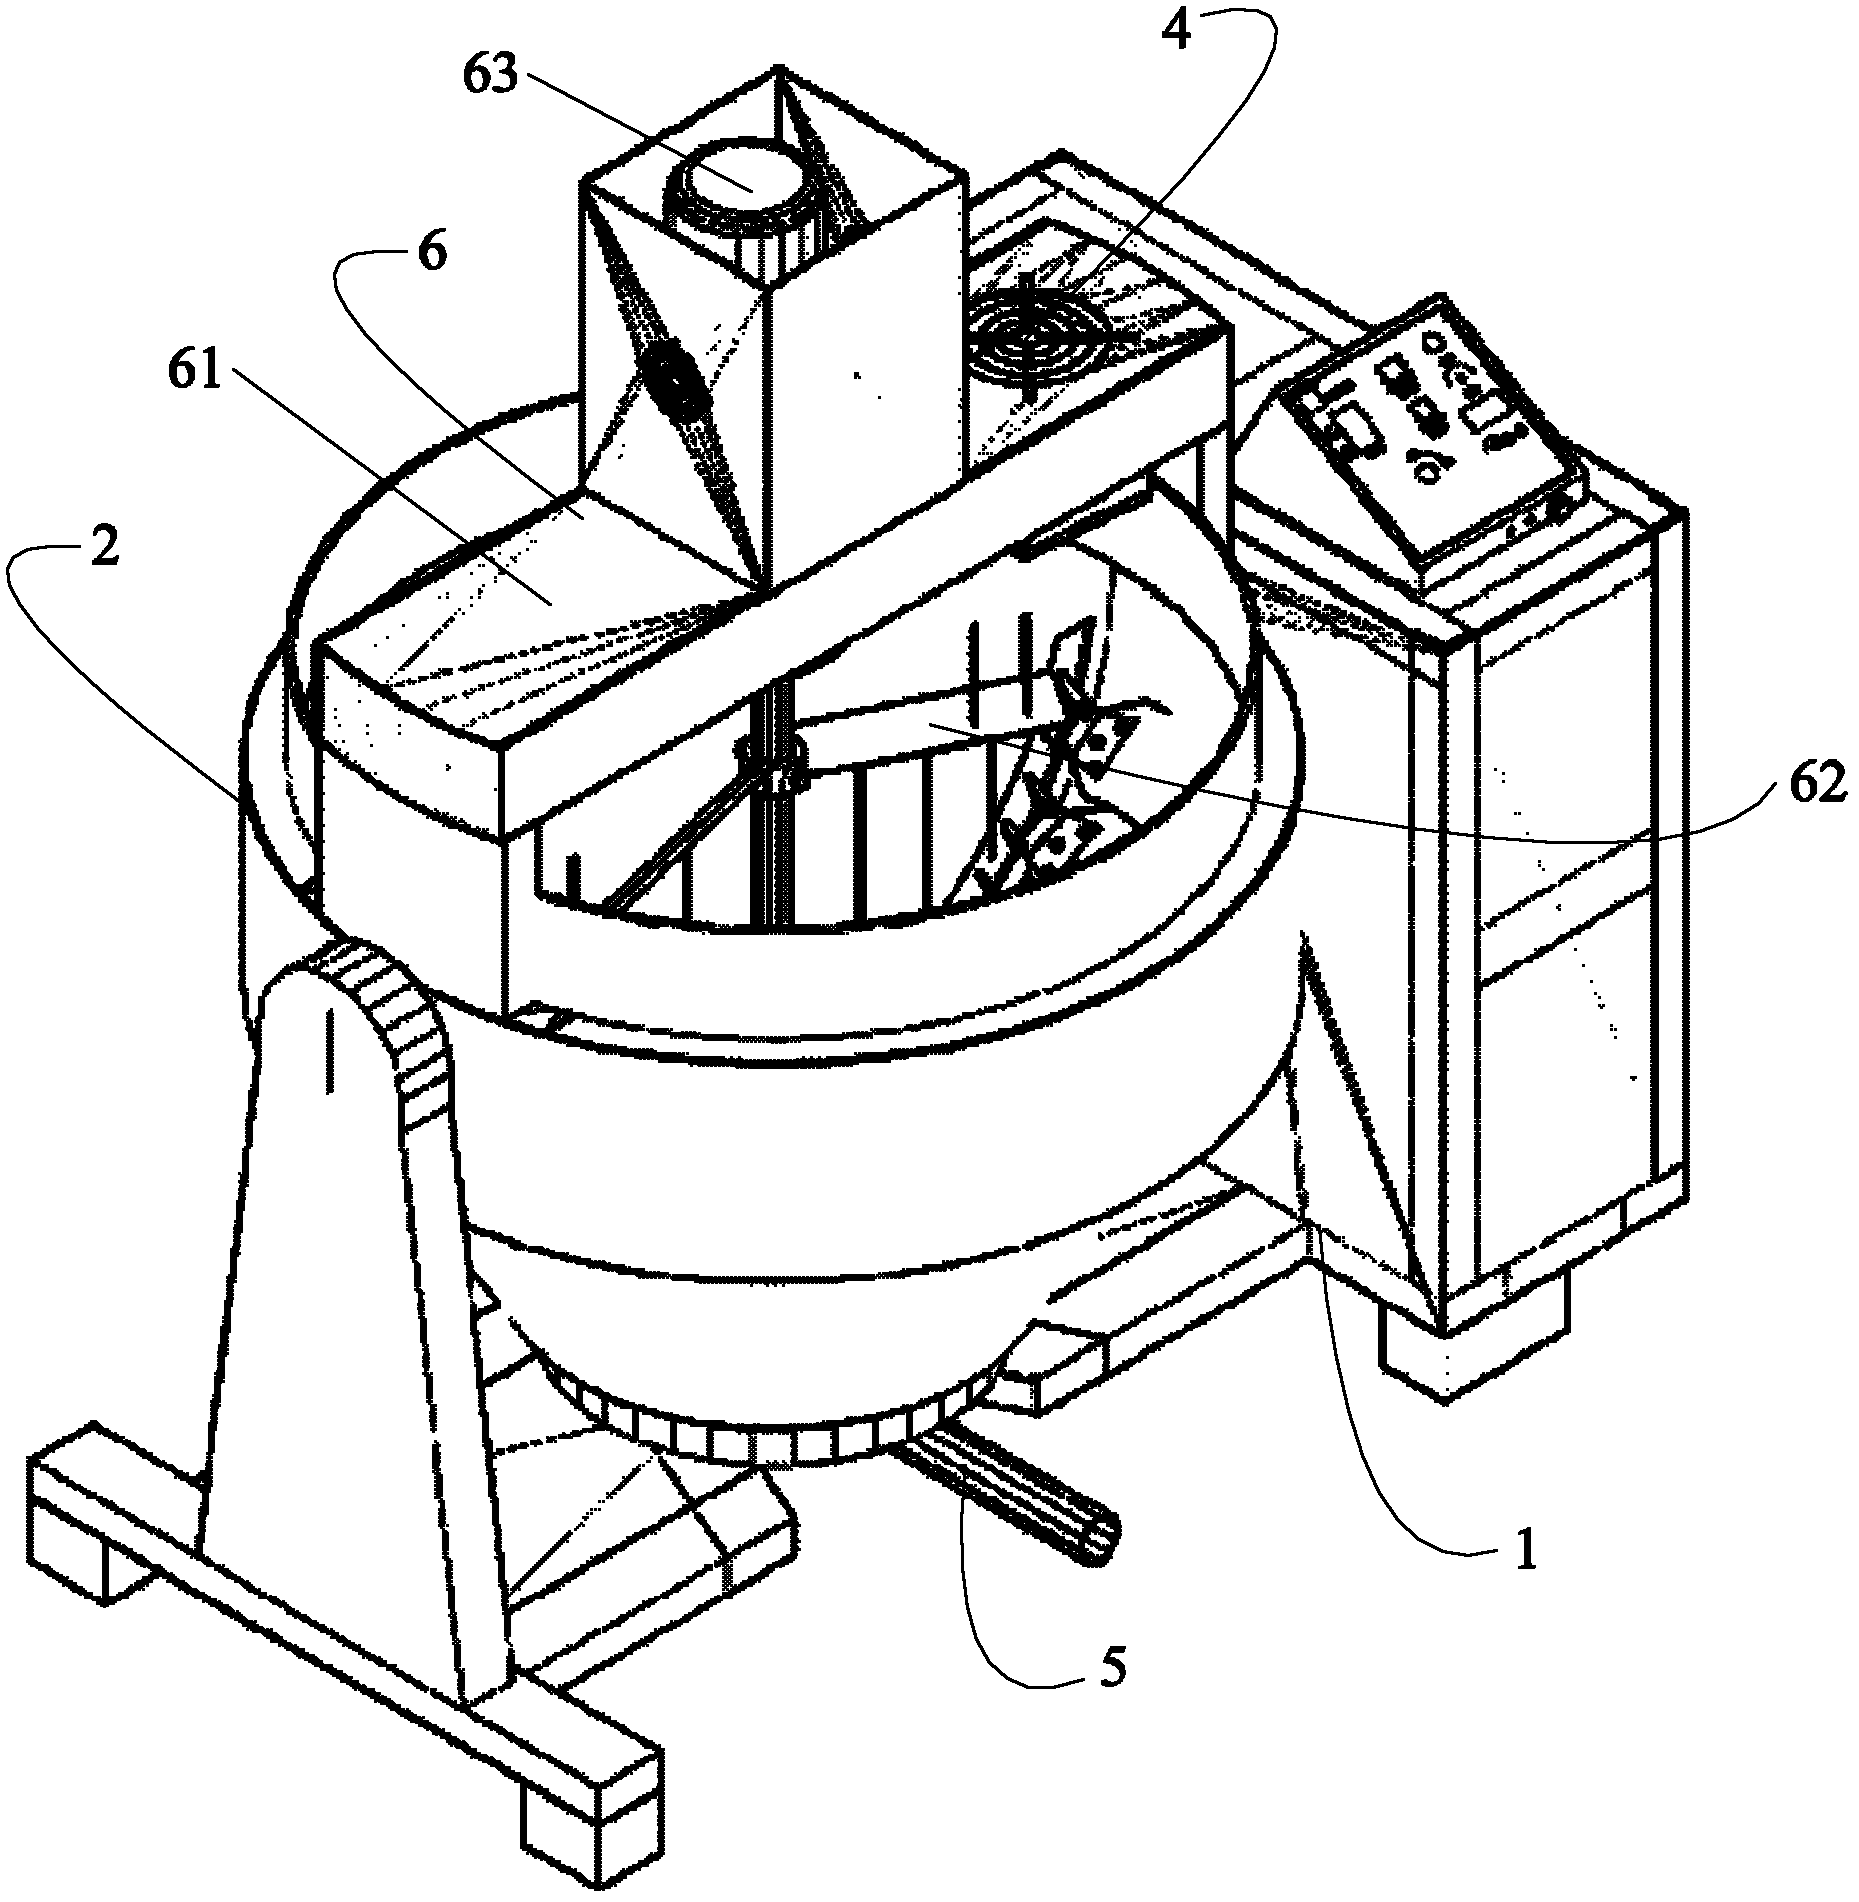 Novel electromagnetic heated food processing device